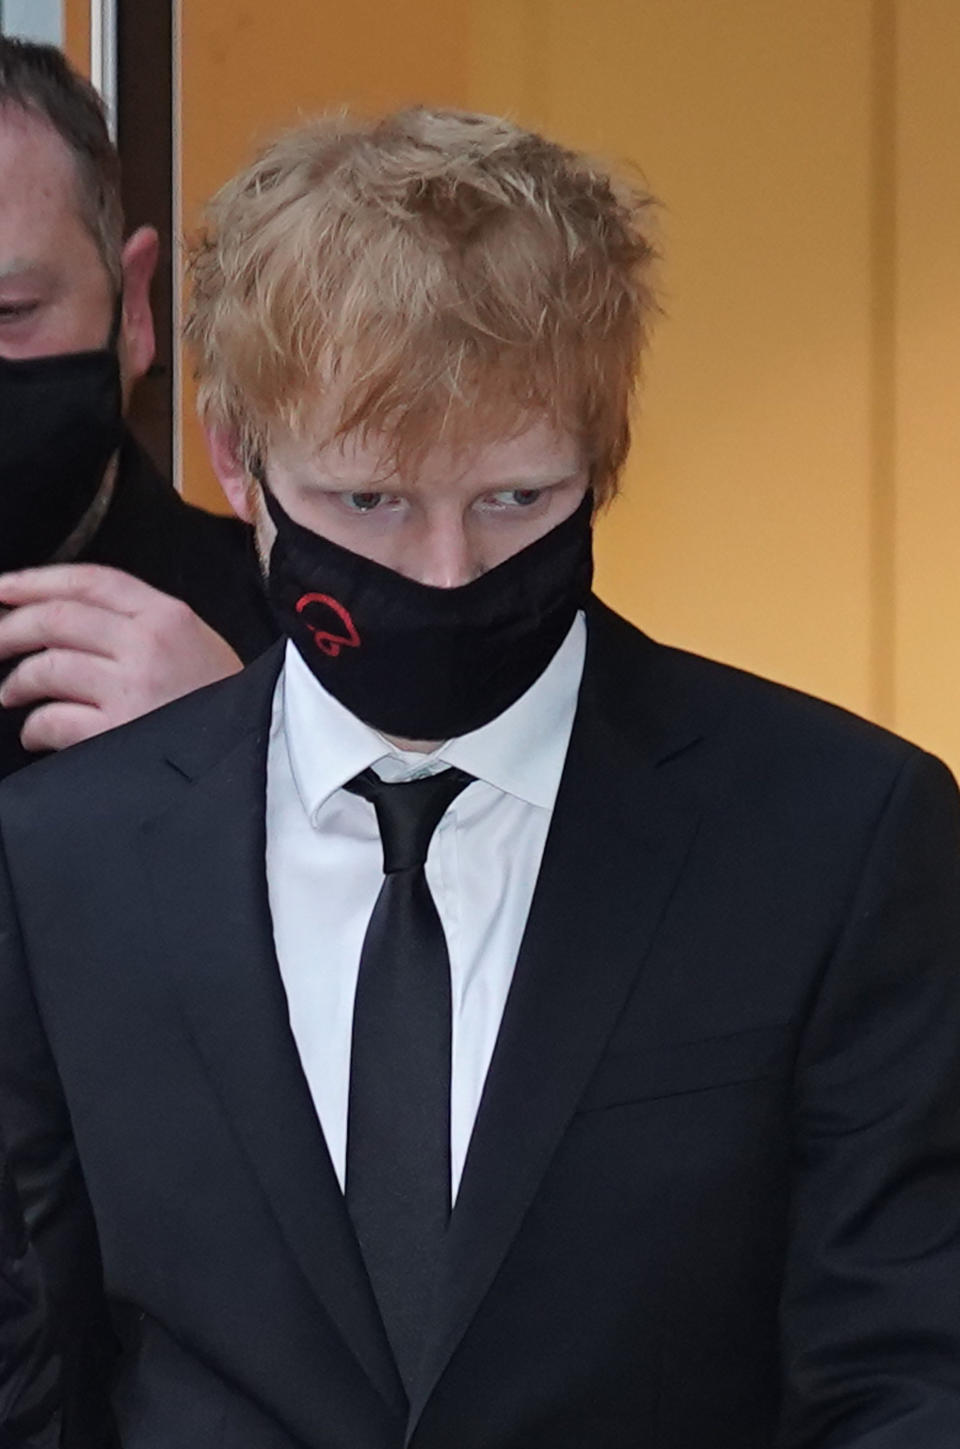 Ed Sheeran leaves the Rolls Building in central London, where he has brought legal action over his 2017 hit song &#39;Shape of You&#39; after song writers Sami Chokri and Ross O&#39;Donoghue claimed the song infringes parts of one of their songs. Picture date: Friday March 4, 2022.